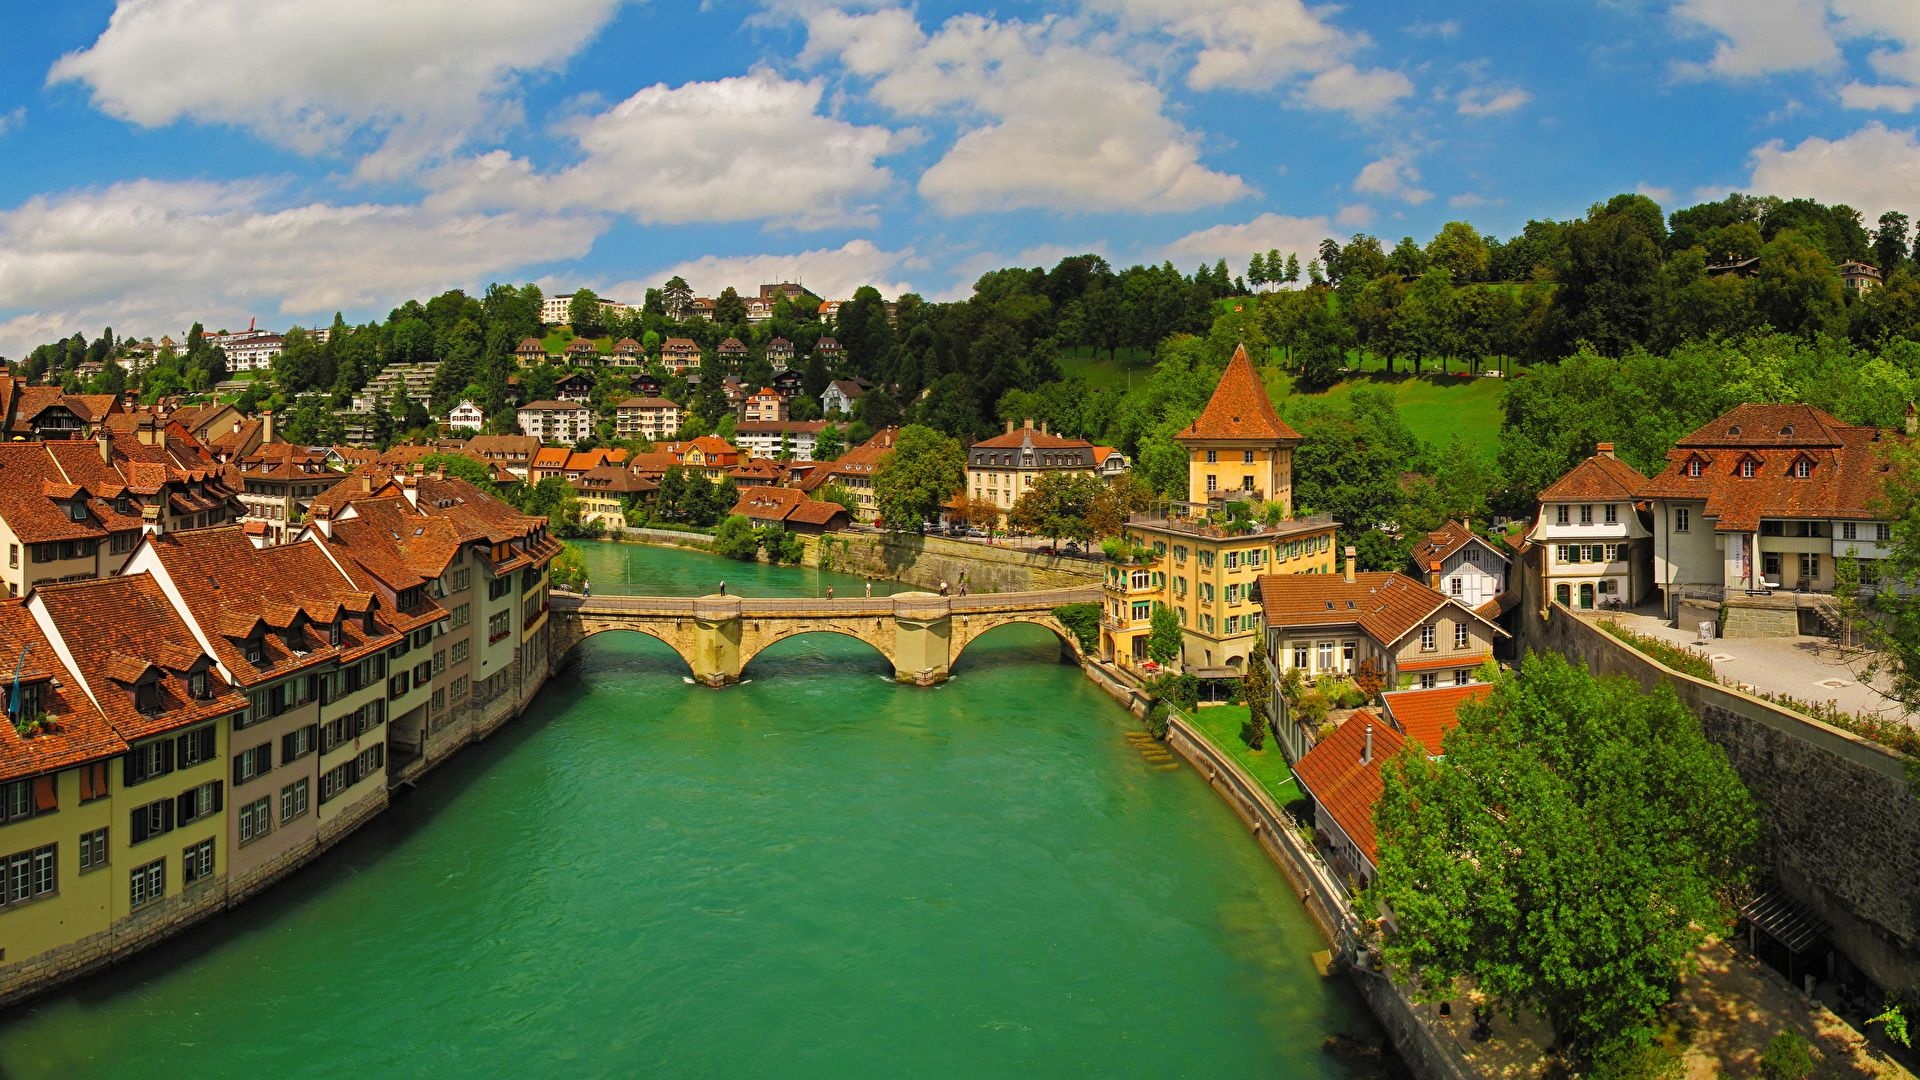 Bern wallpapers, Top free backgrounds, Scenic views, Swiss architecture, 1920x1080 Full HD Desktop